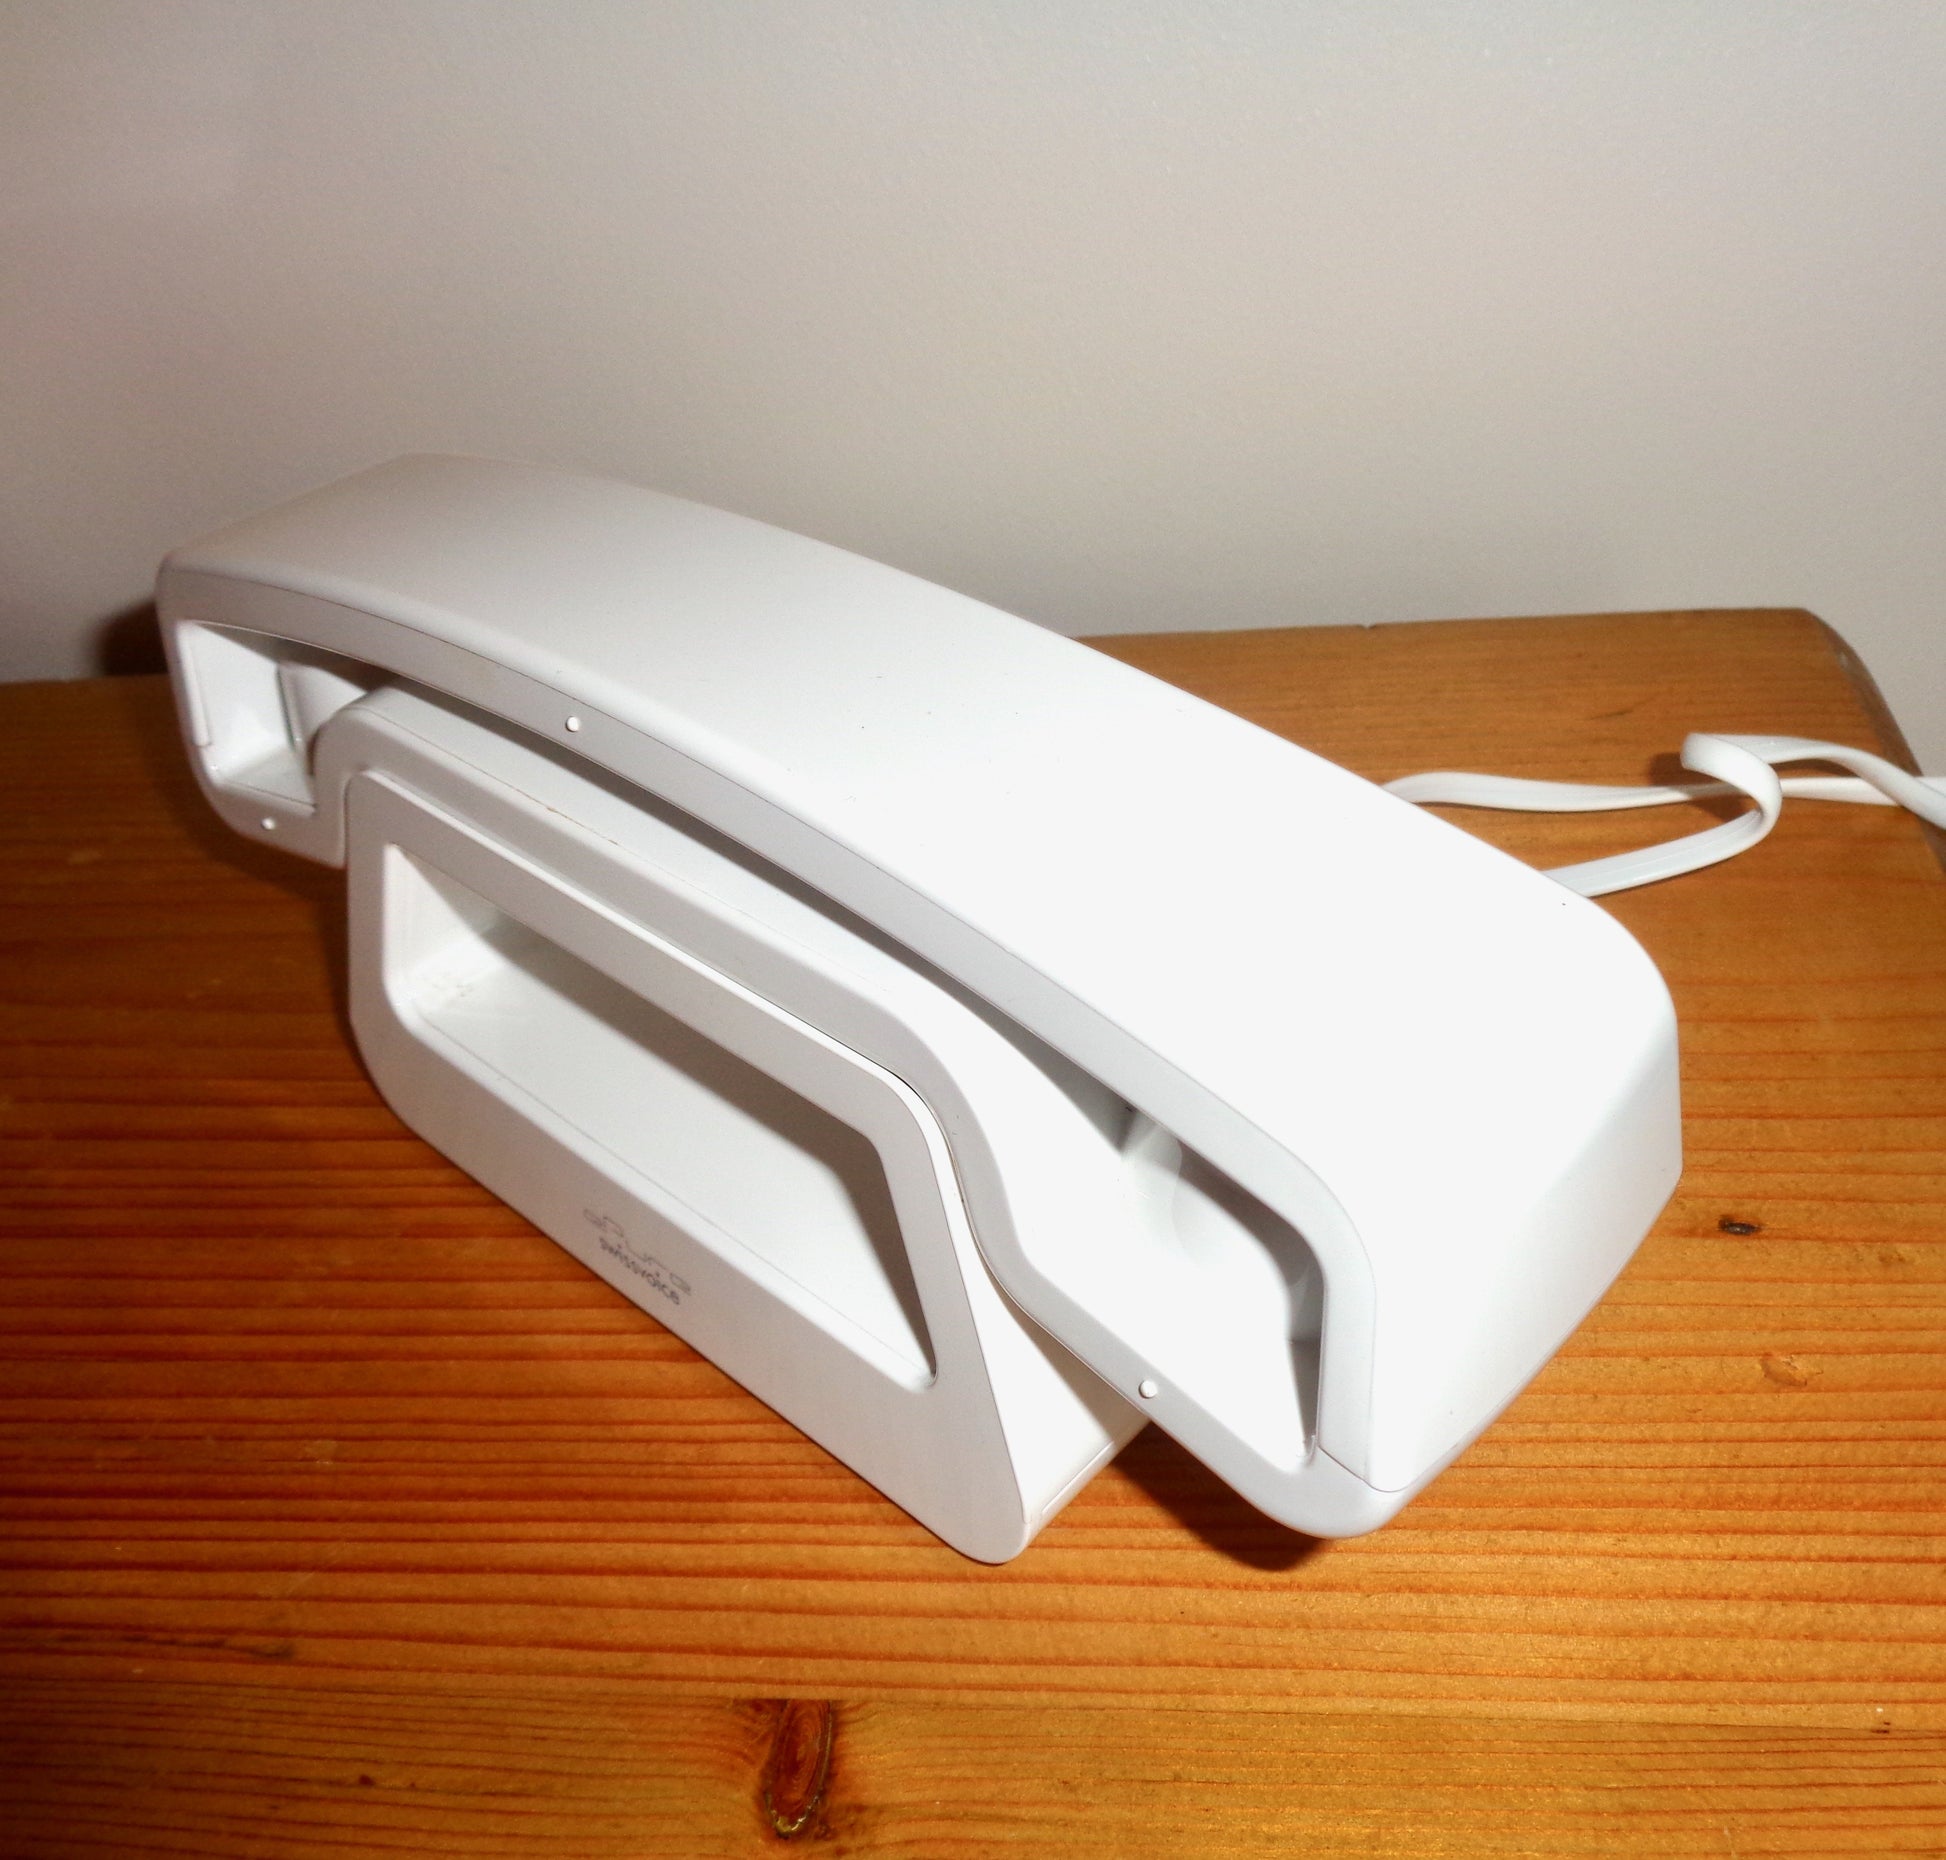 Original Swissvoice Epure DECT Cordless Analogue Telephone In White –  Mullard Antiques and Collectibles